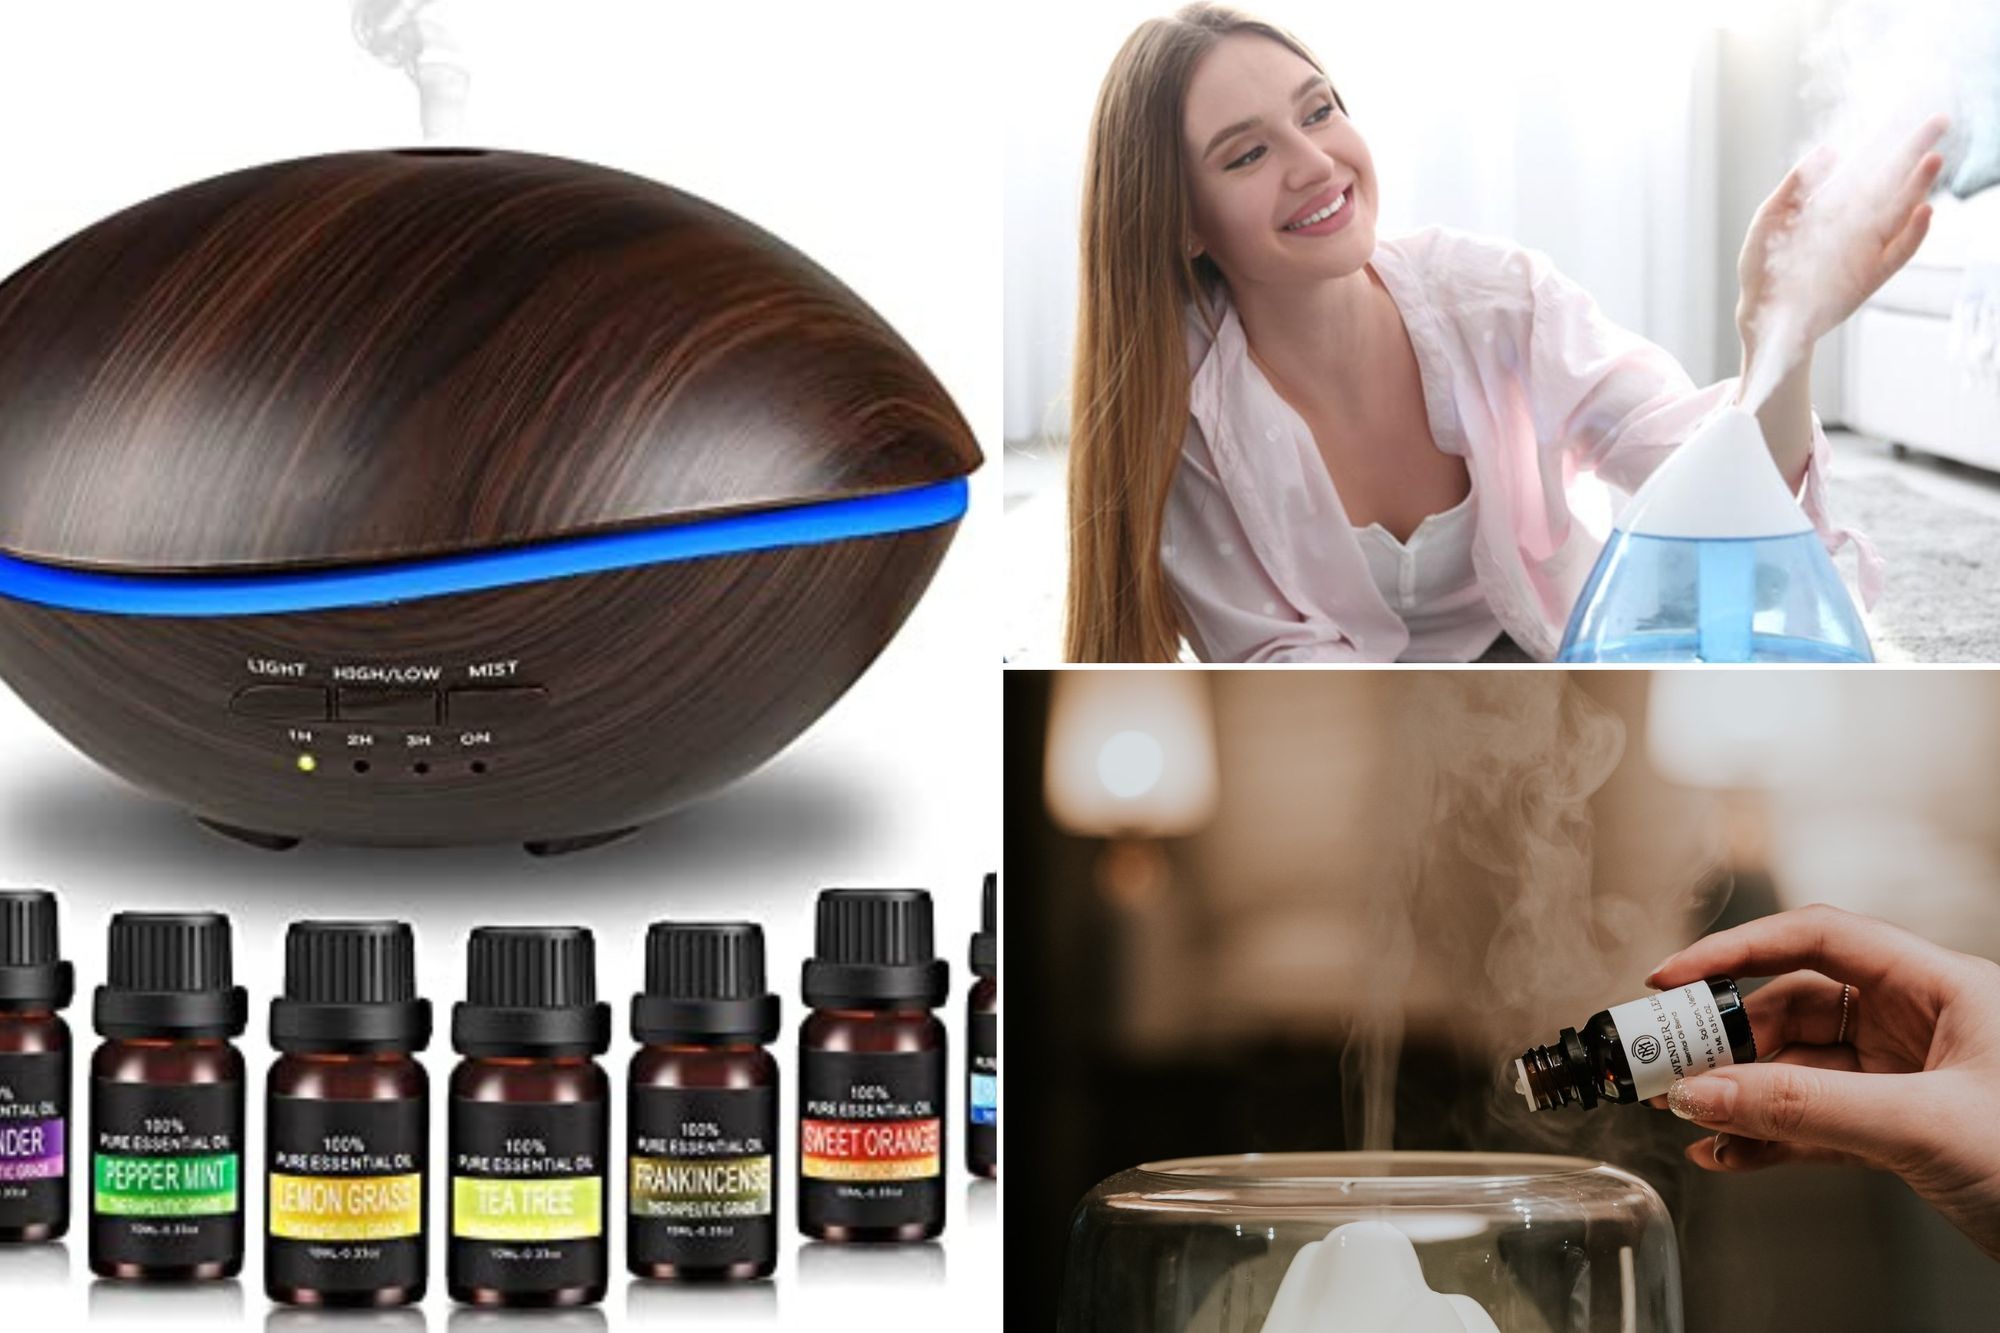 Essential Oils for Humidifier: Your 4 Best Choices